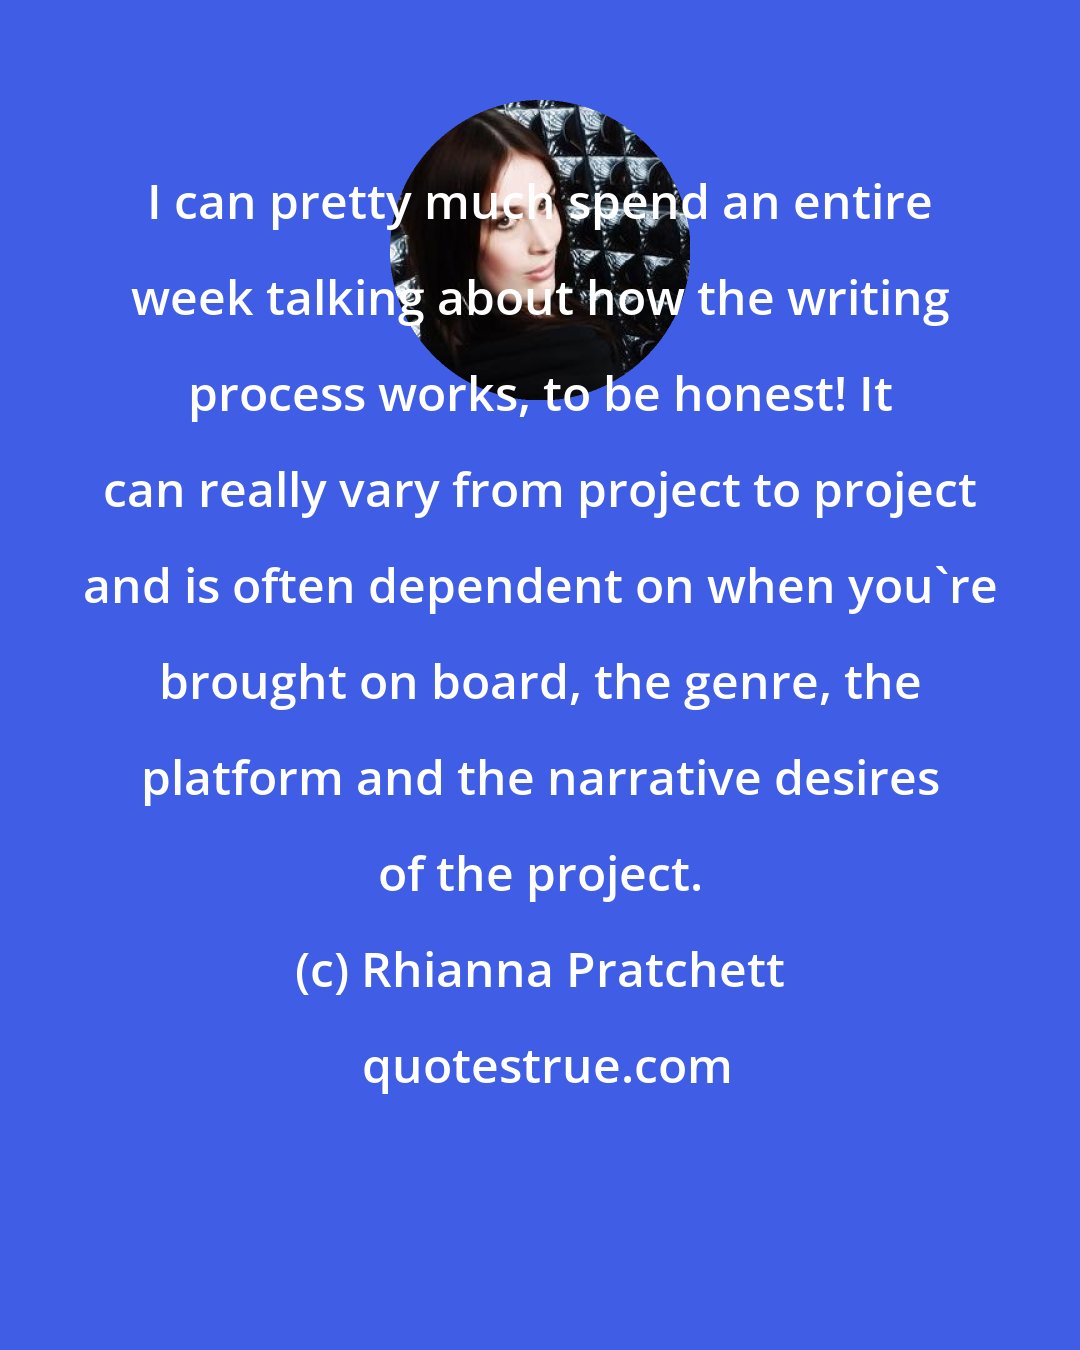 Rhianna Pratchett: I can pretty much spend an entire week talking about how the writing process works, to be honest! It can really vary from project to project and is often dependent on when you're brought on board, the genre, the platform and the narrative desires of the project.